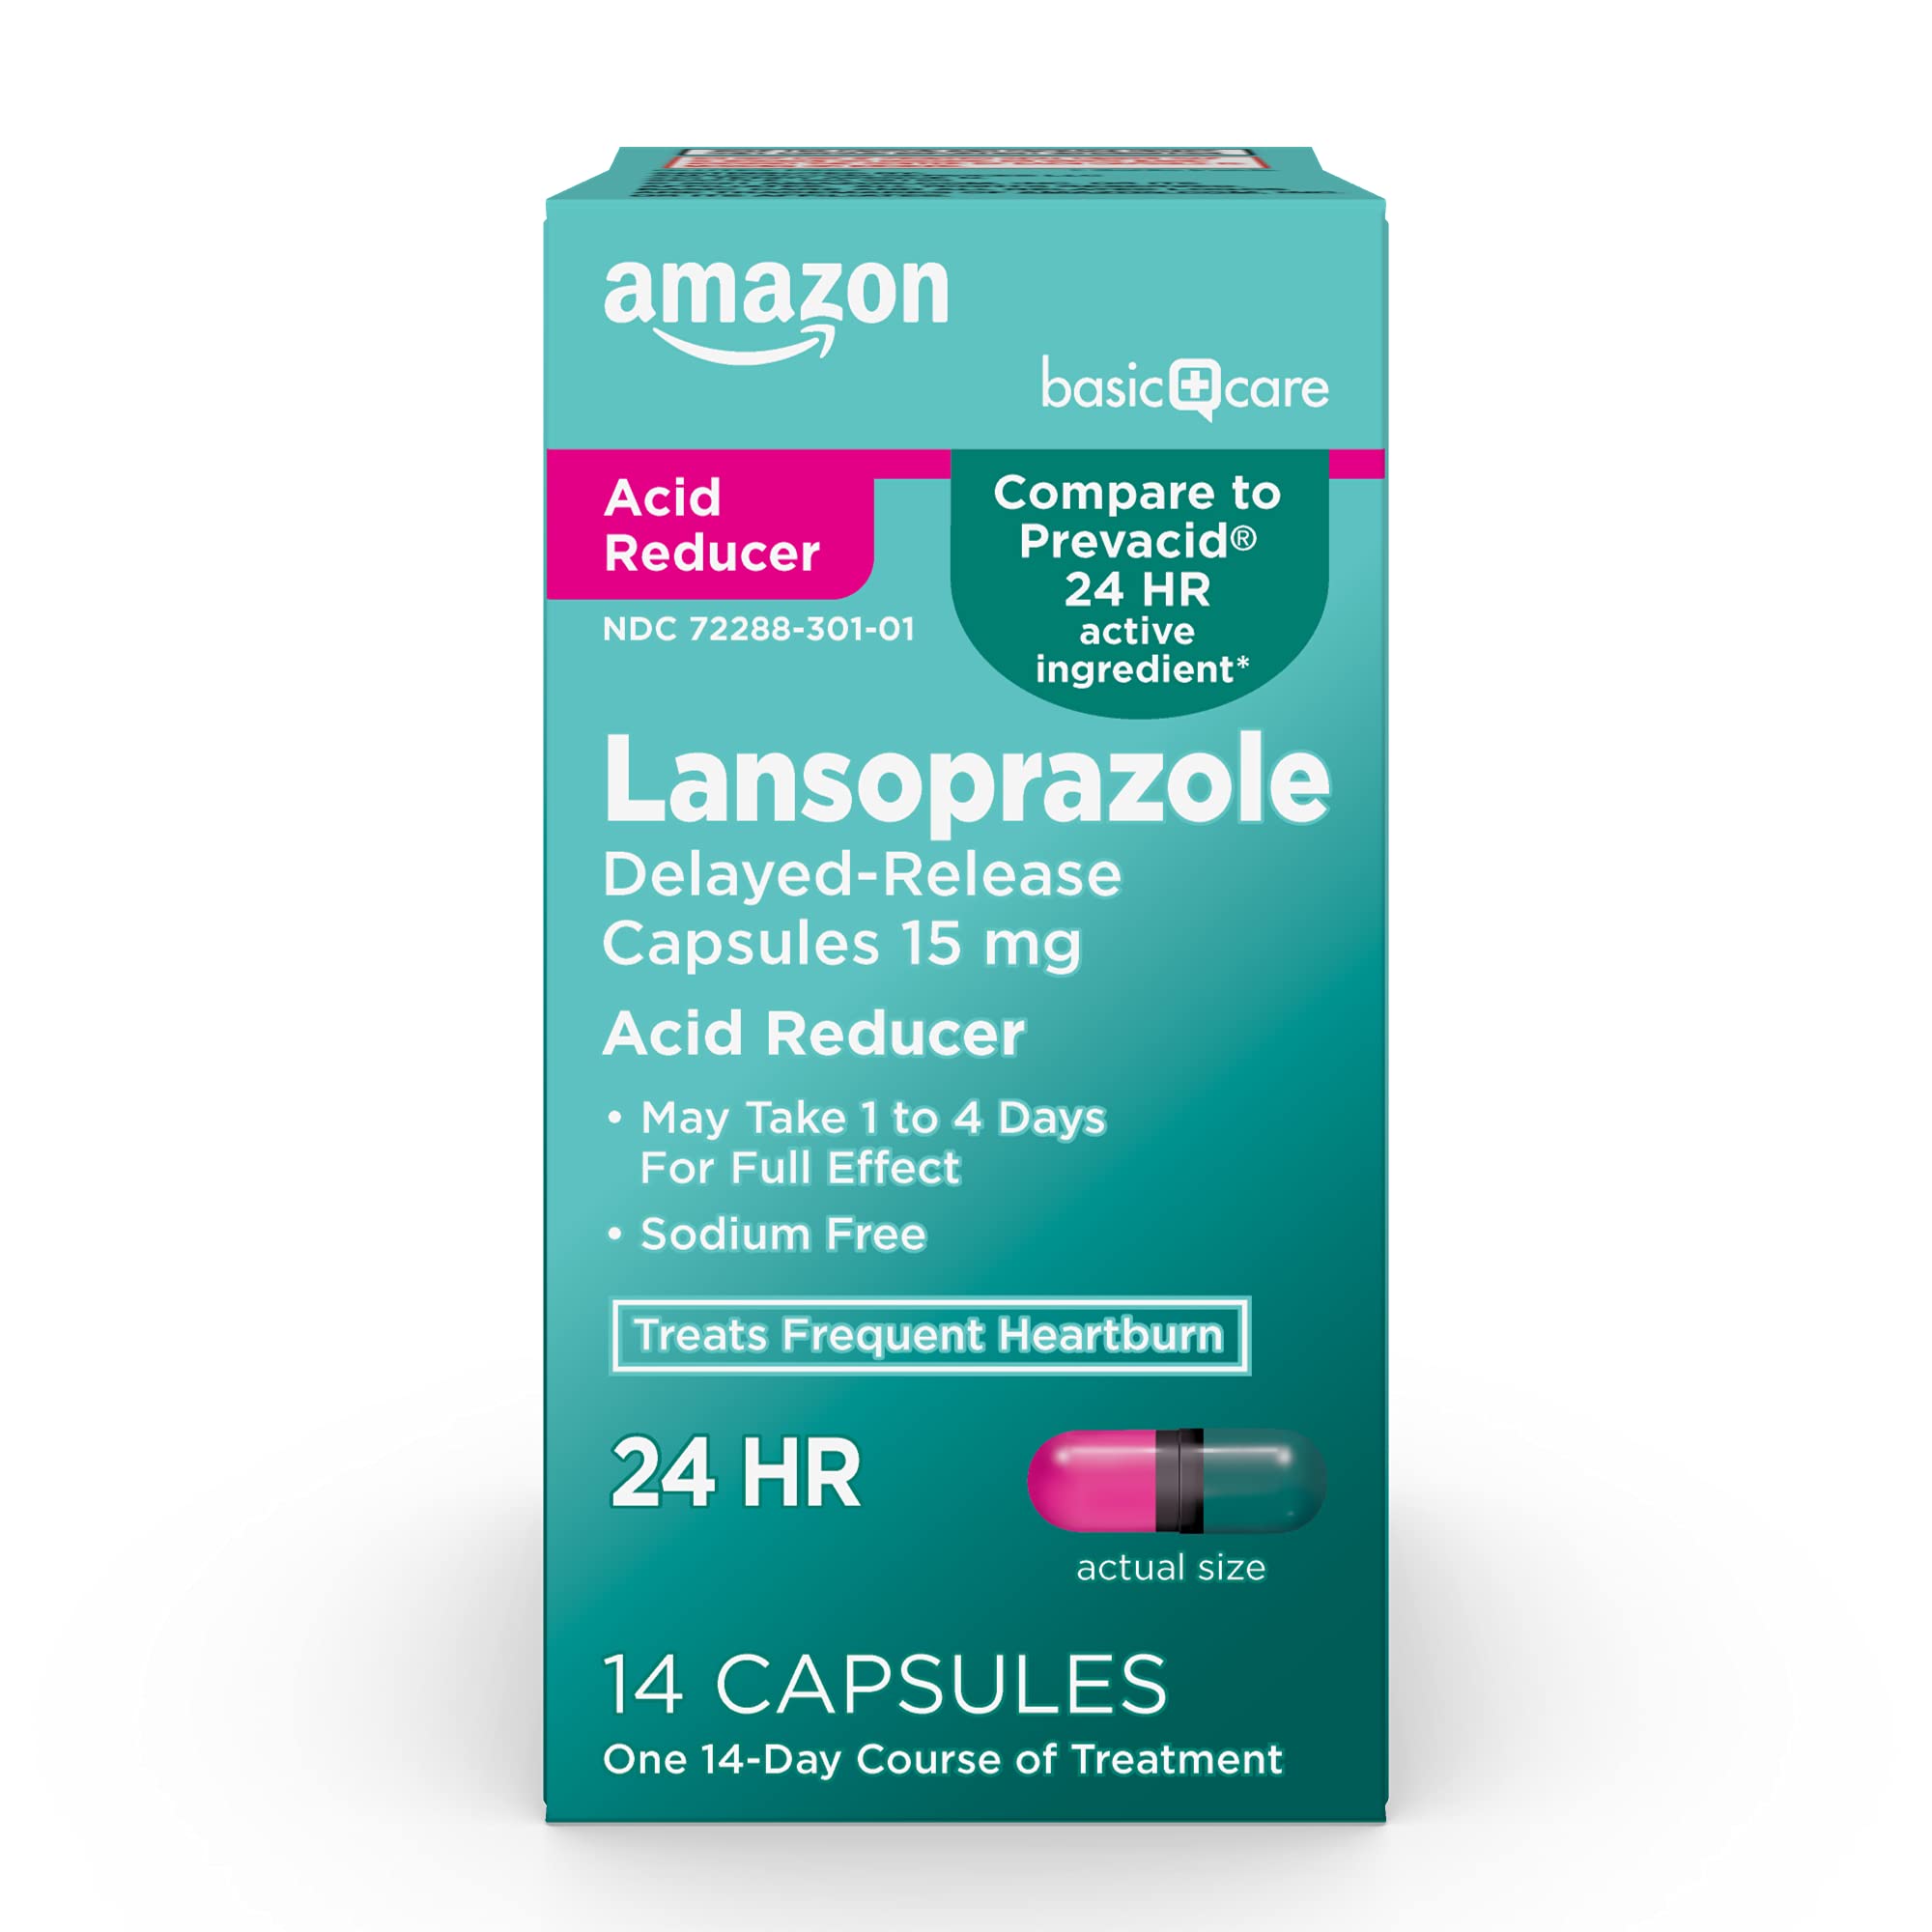 14-Count Amazon Basic Care Lansoprazole Delayed Release Heartburn Capsules (15 mg) $2.85 w/ S&S + Free Shipping w/ Prime or on $35+